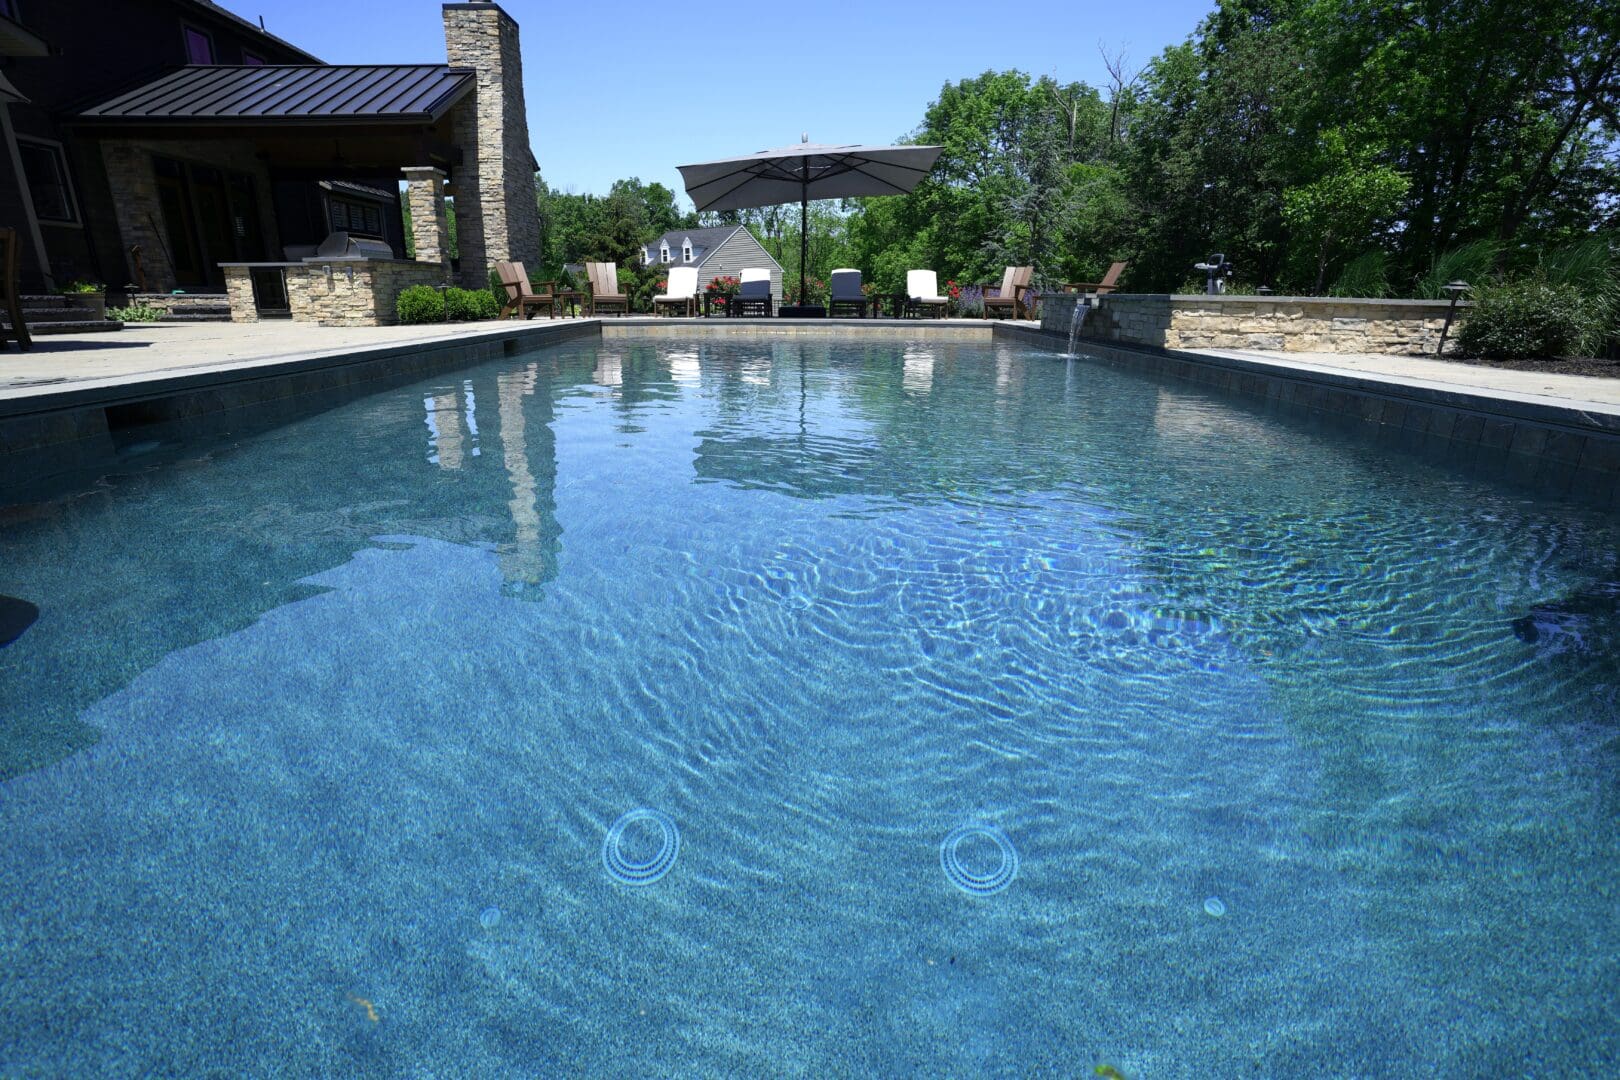 A meticulously crafted swimming pool in a picturesque backyard showcasing exquisite pool design.